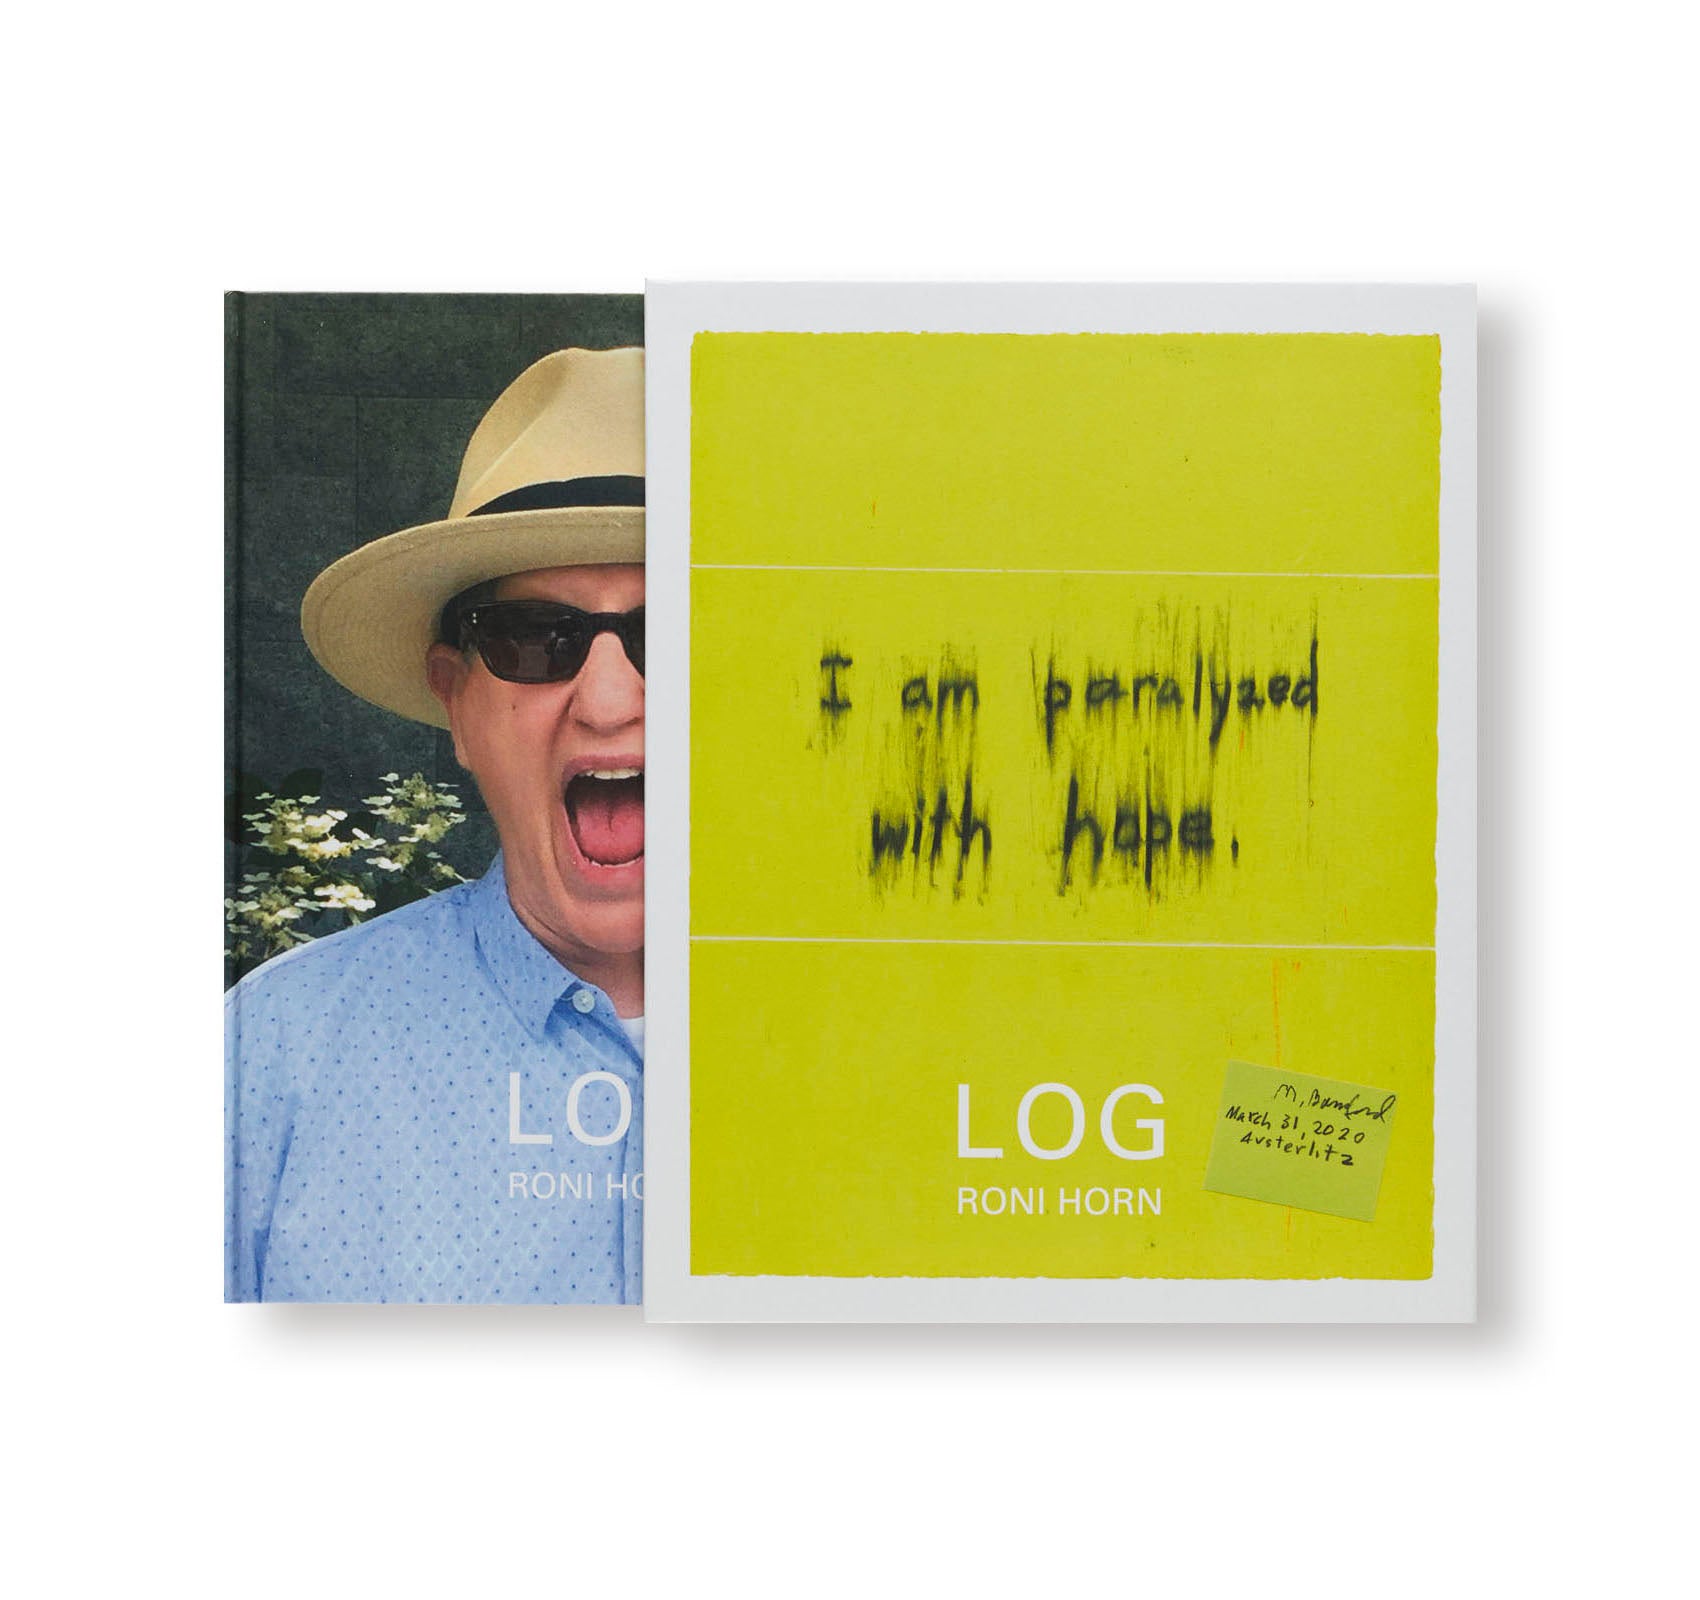 LOG by Roni Horn [SPECIAL EDITION]